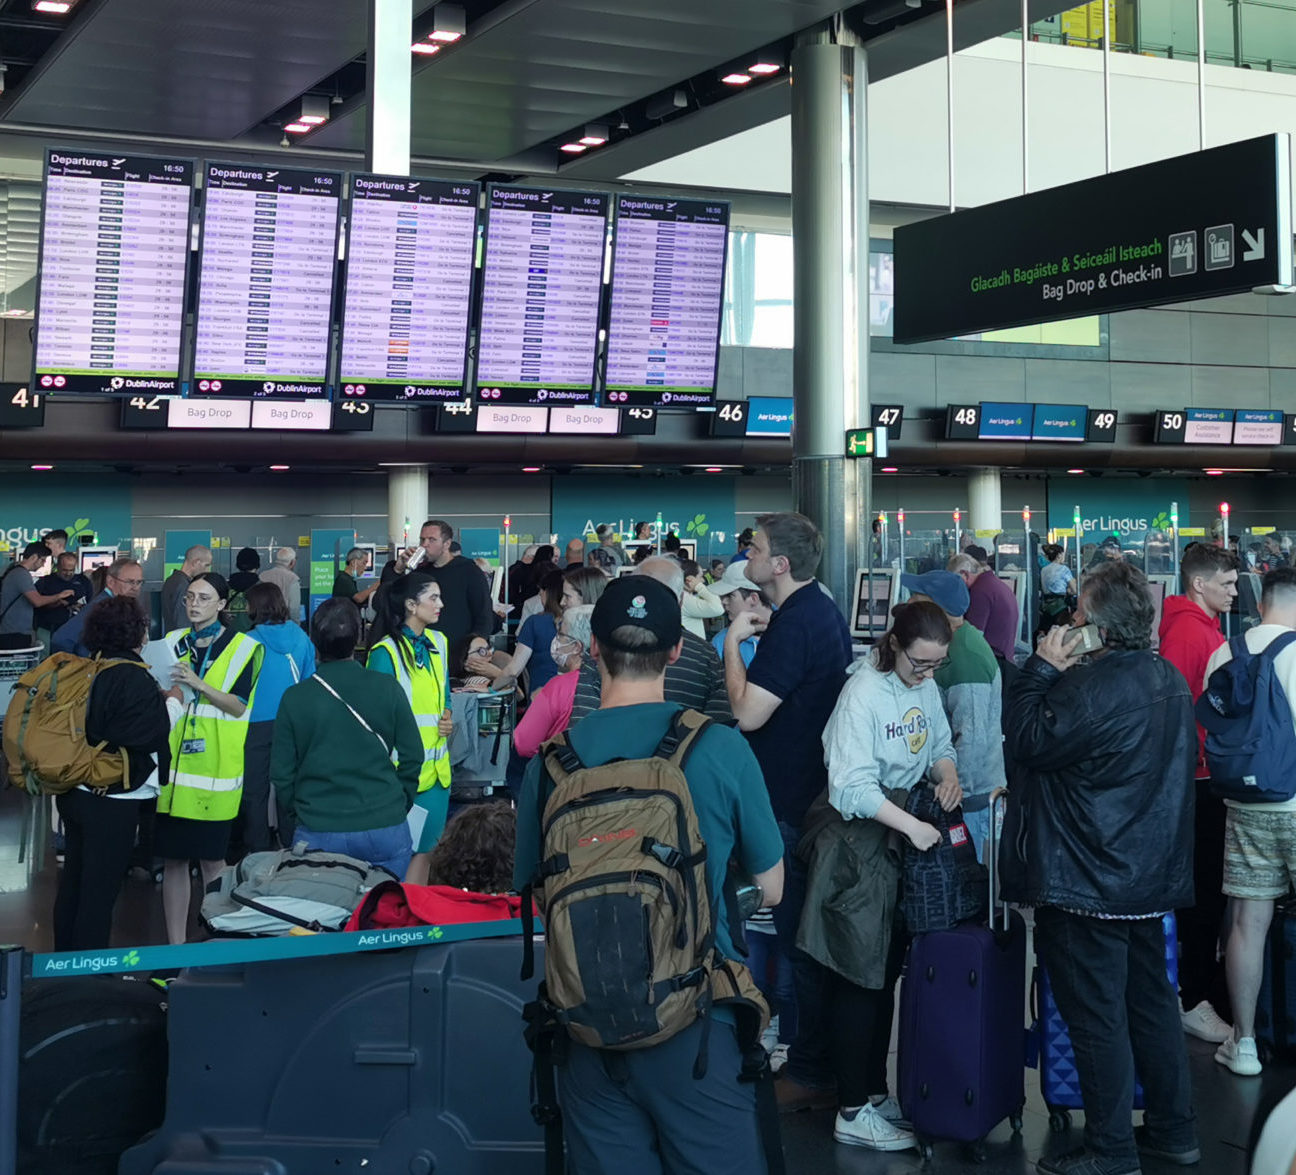 Passengers at Terminal 2 in Dublin Airport after Aer Lingus flights were cancelled due to an IT problem at the airline.